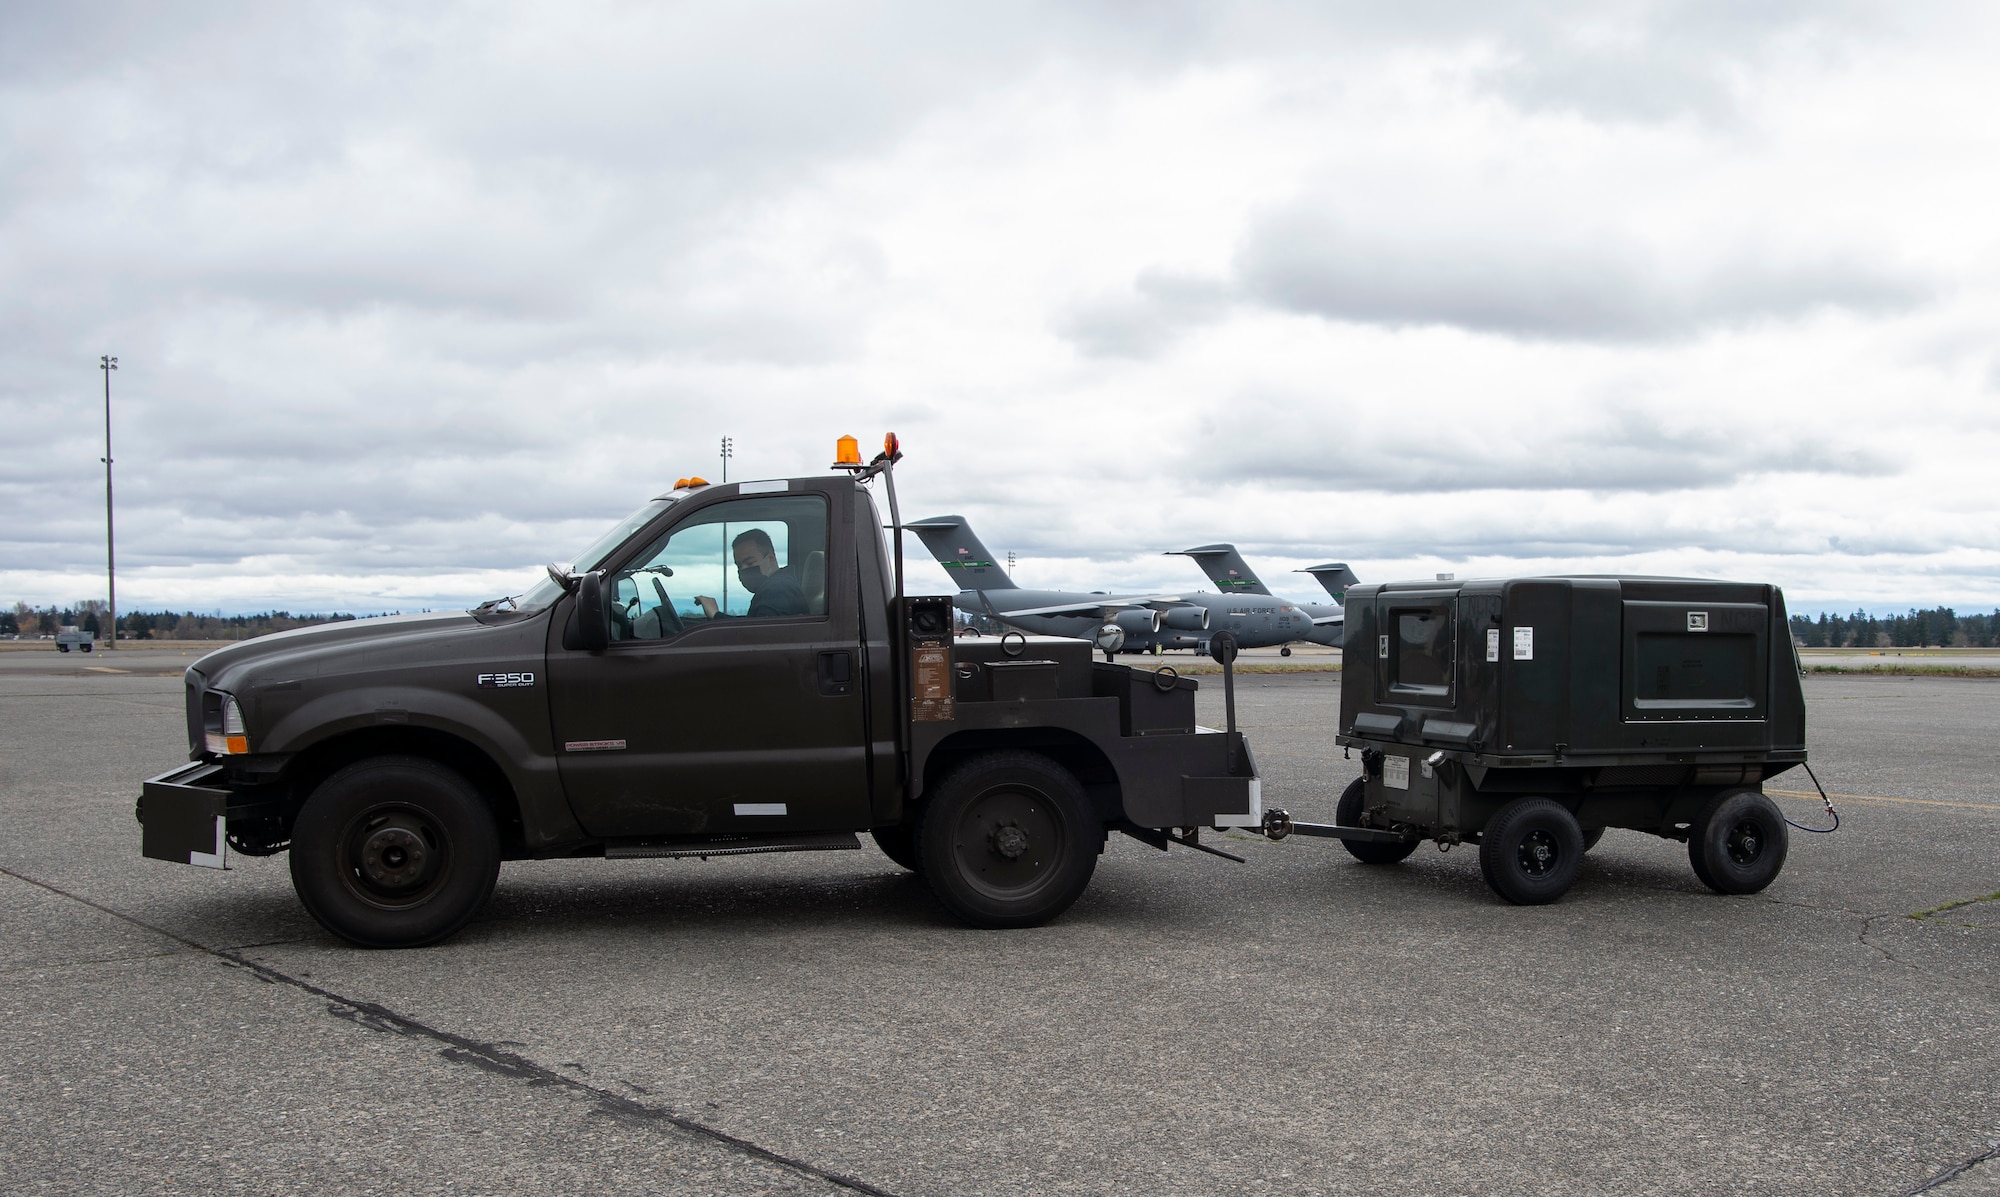 U.S. Air Force Airman 1st Class Sean Gilbert, 62nd Maintenance Squadron Aerospace Ground Equipment Flight apprentice, tows a generator at Joint Base Lewis-McChord, Washington, April 7, 2021. The service, pick-up and delivery (SPUDS) section of the 62nd MXS AGE flight transports equipment to and from the flightline to assist in the inspection and repair of C-17 Globemaster IIIs at McChord Field. (U.S. Air Force photo by Senior Airman Tryphena Mayhugh)